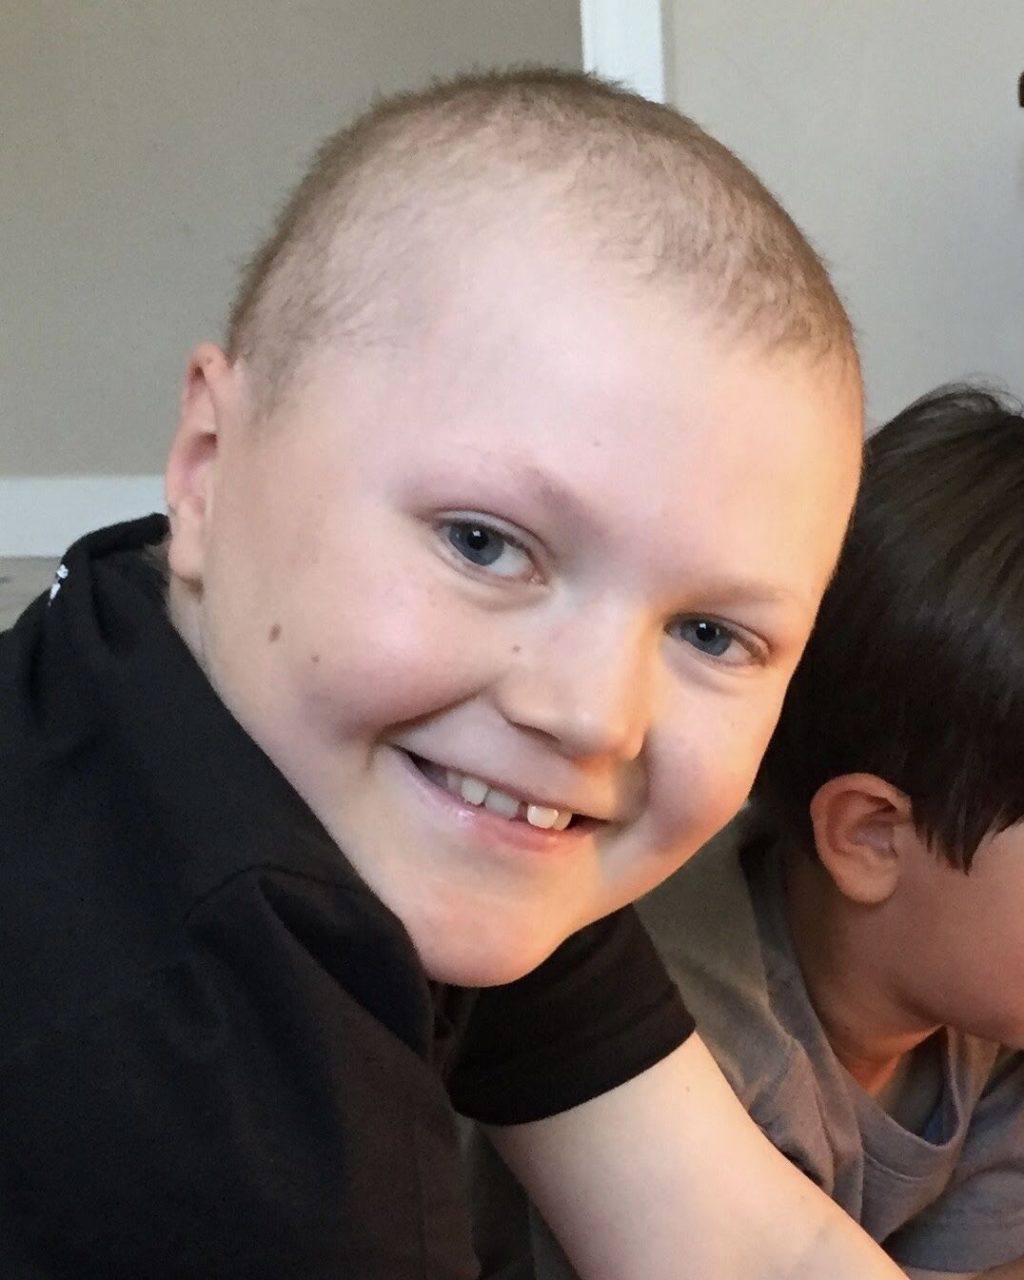 After eight years of treatment and two relapses, Gavin has now been cancer-free for seven years! – Pediatric Cancer Research Foundation